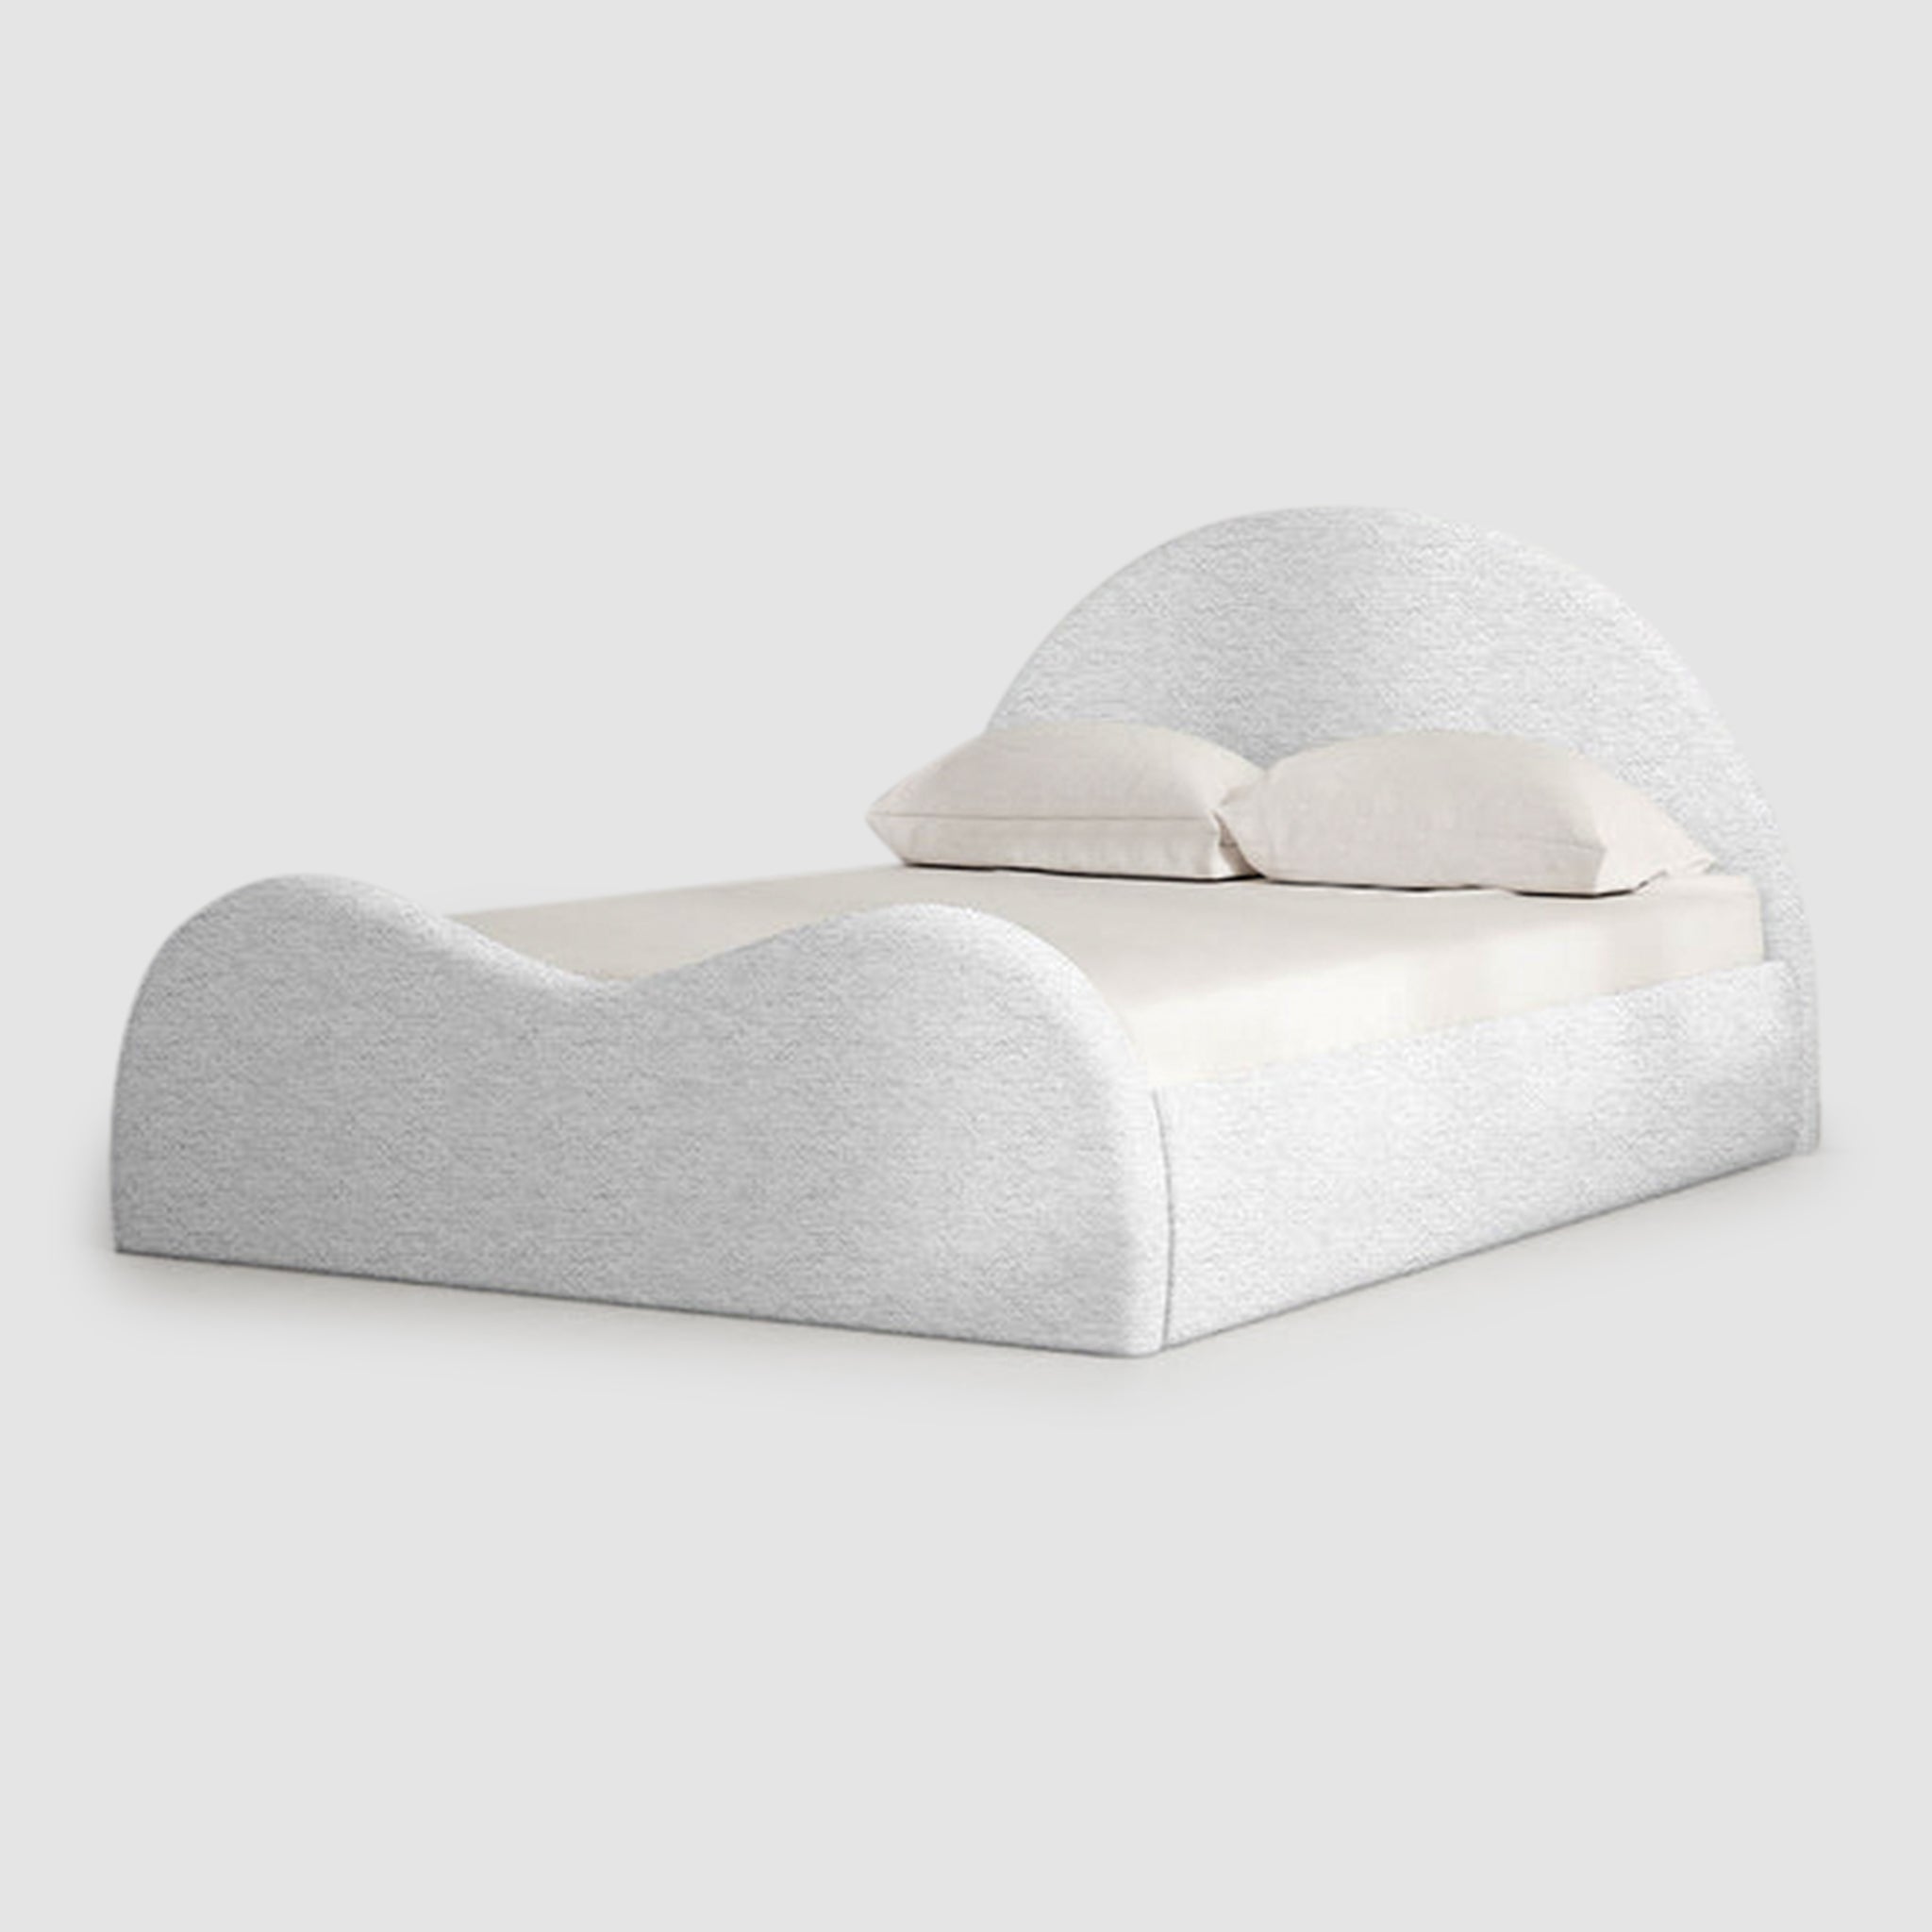 Sleek silver The Dolly Bed with a modern curved design